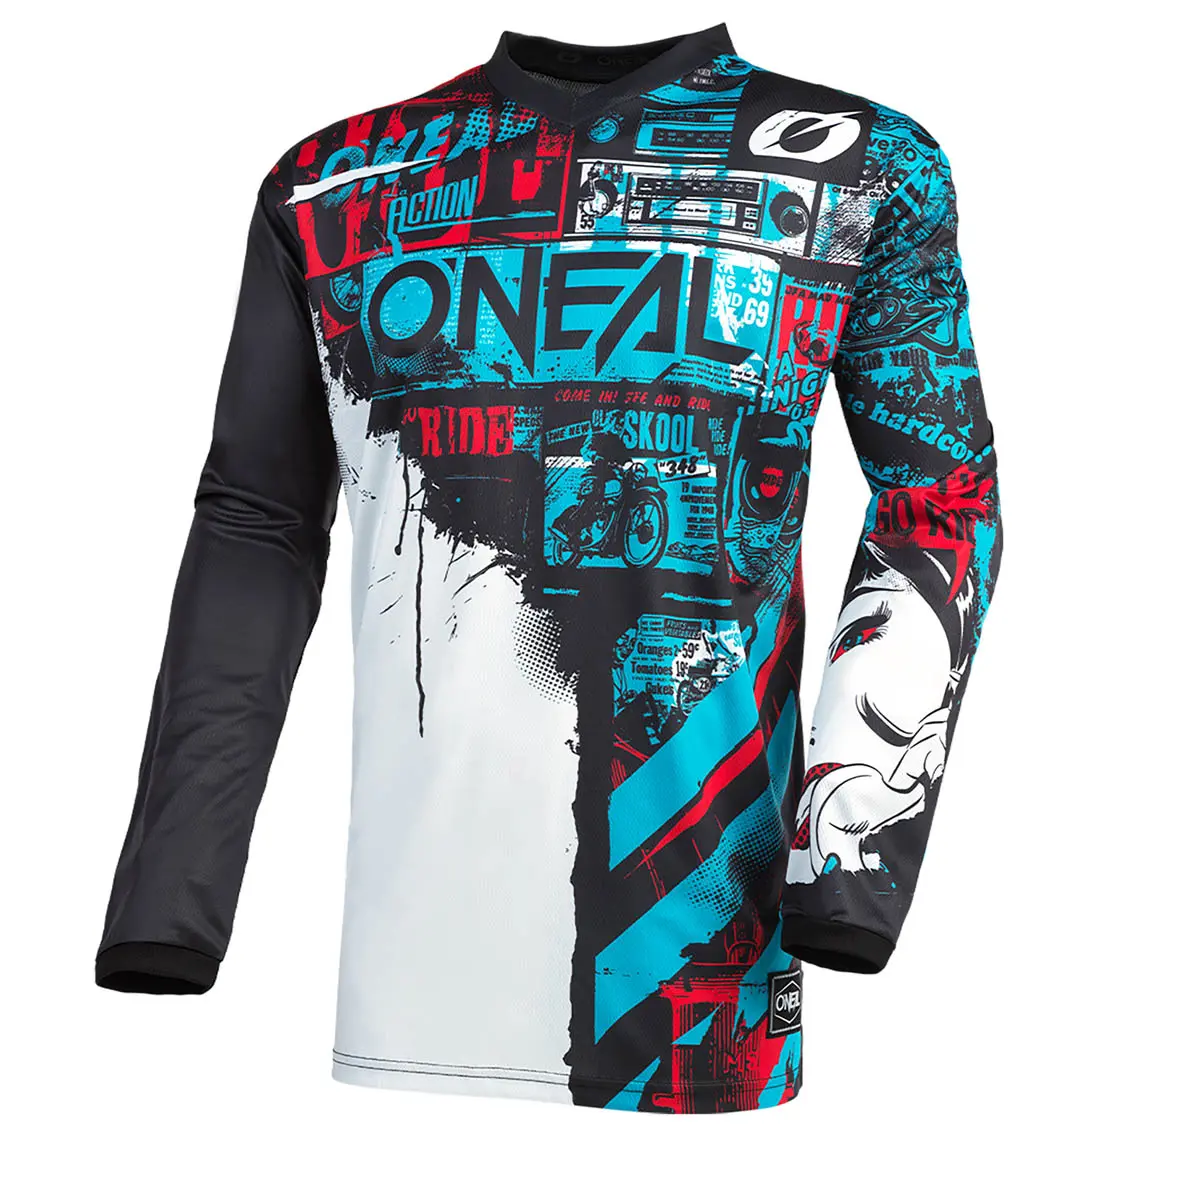 2021_ONeal_ELEMENT_Jersey_RIDE_black_blue_front